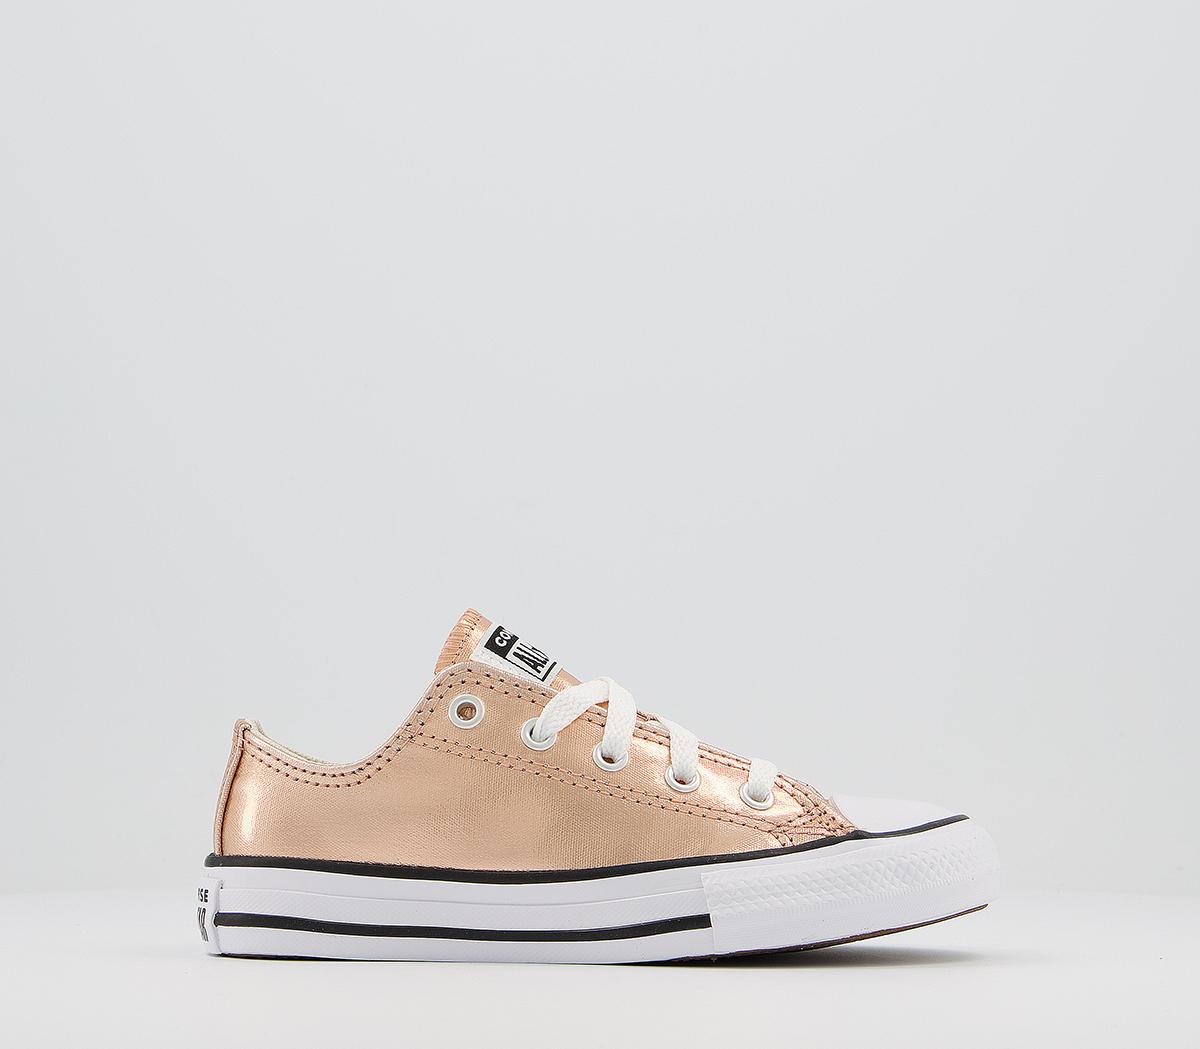 ConverseAll Star Low Youth TrainersBlush Gold White Black Metallic